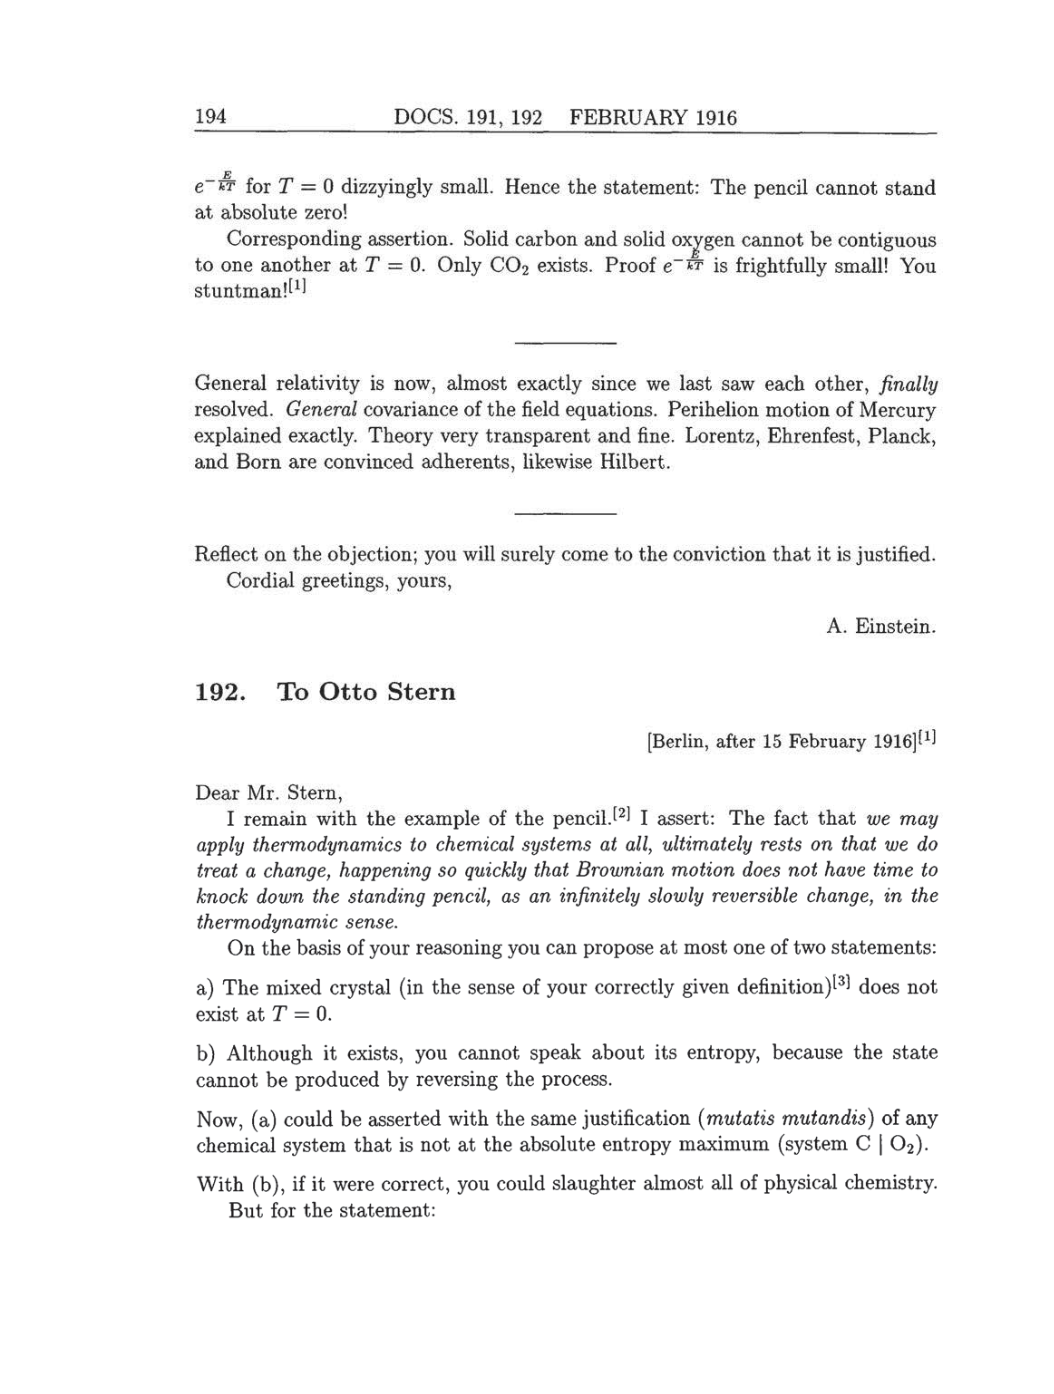 Volume 8: The Berlin Years: Correspondence, 1914-1918 (English translation supplement) page 194